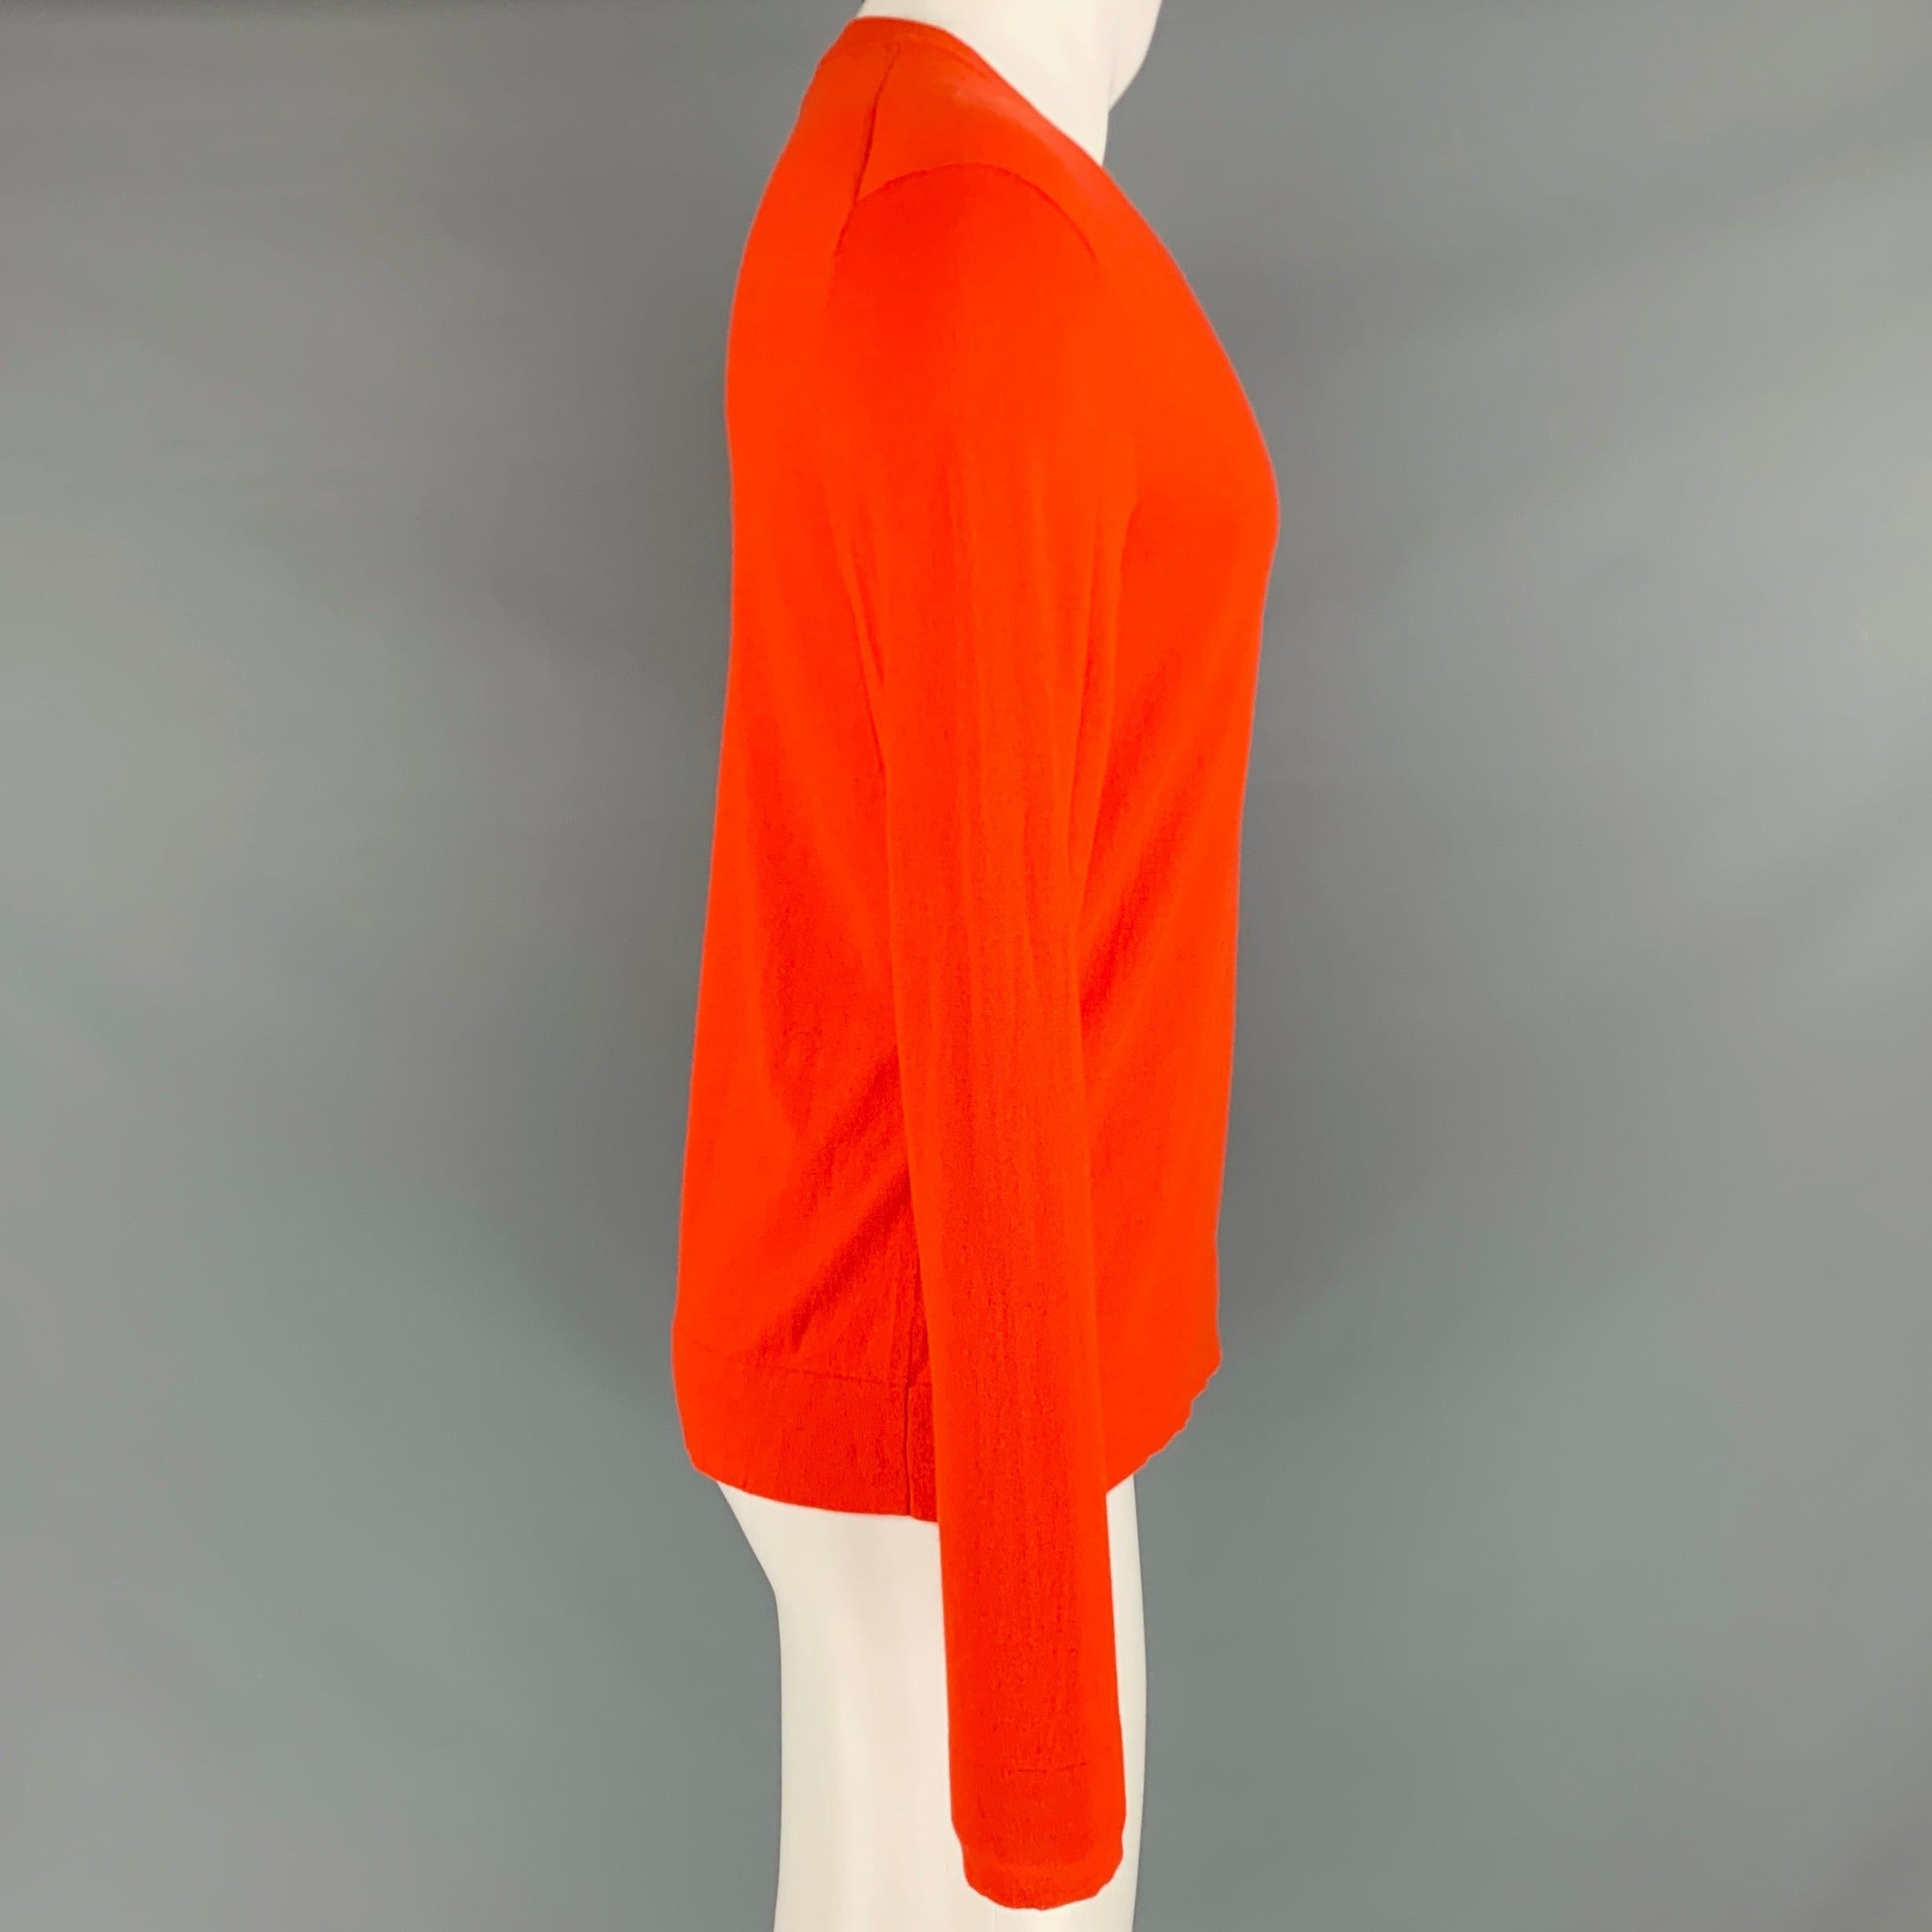 THEORY pullover
in an orange cotton cashmere blend knit featuring a V-neck.Excellent Pre-Owned Condition. 

Marked:   M 

Measurements: 
 
Shoulder: 17.5 inches Chest: 42 inches Sleeve: 26 inches Length: 26 inches 
  
  
 
Reference No.: